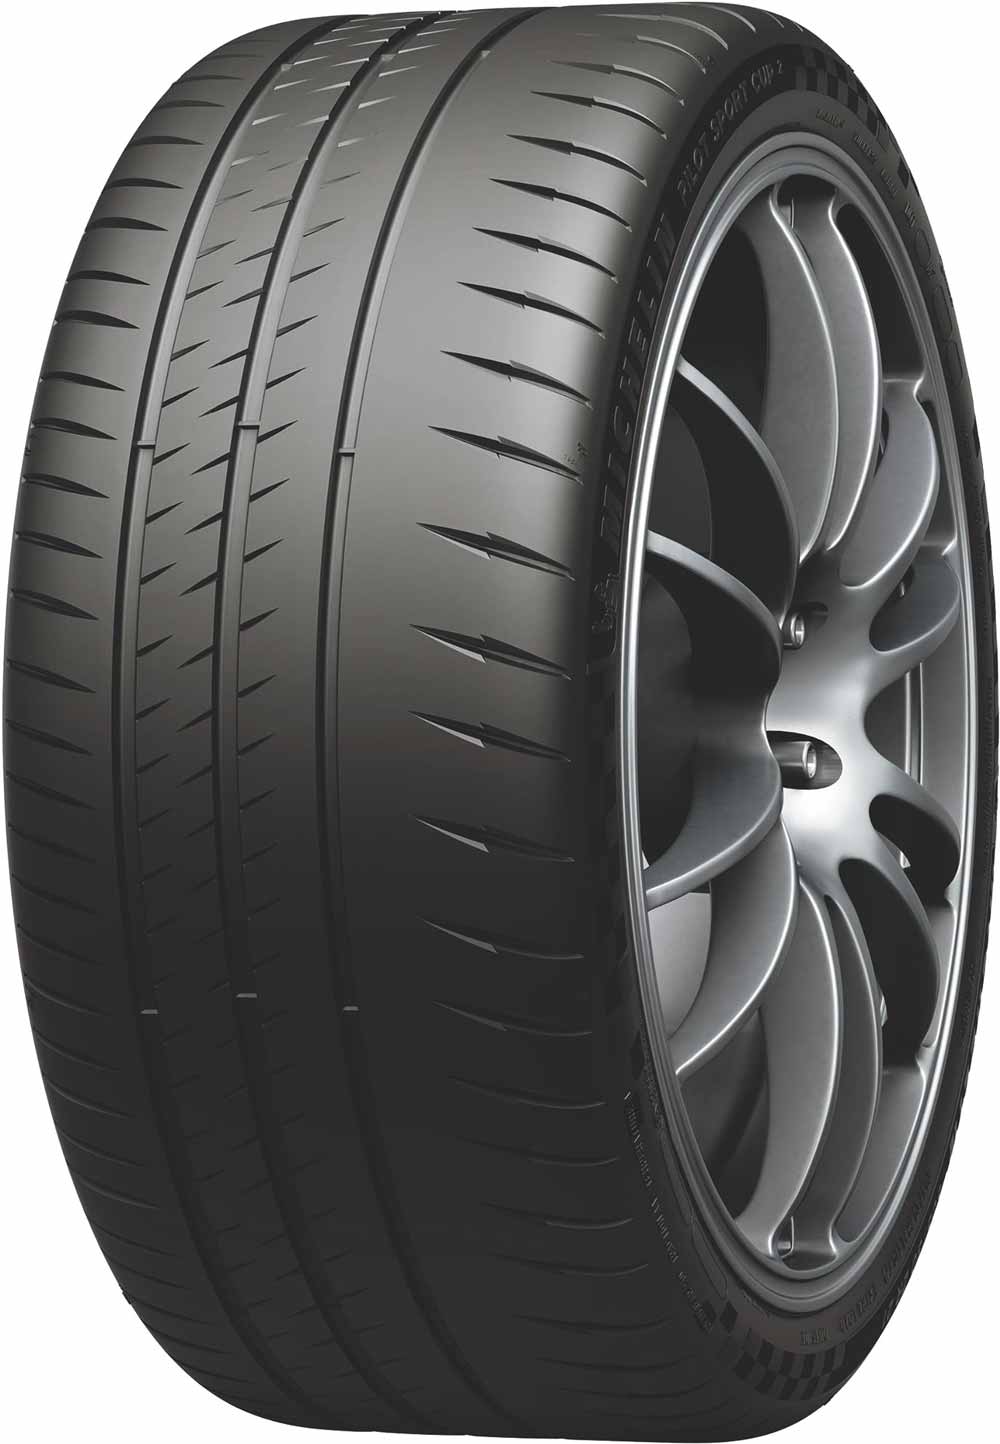 Anvelope auto MICHELIN SPORT CUP 2 MO XL MERCEDES 325/30 R20 106Y